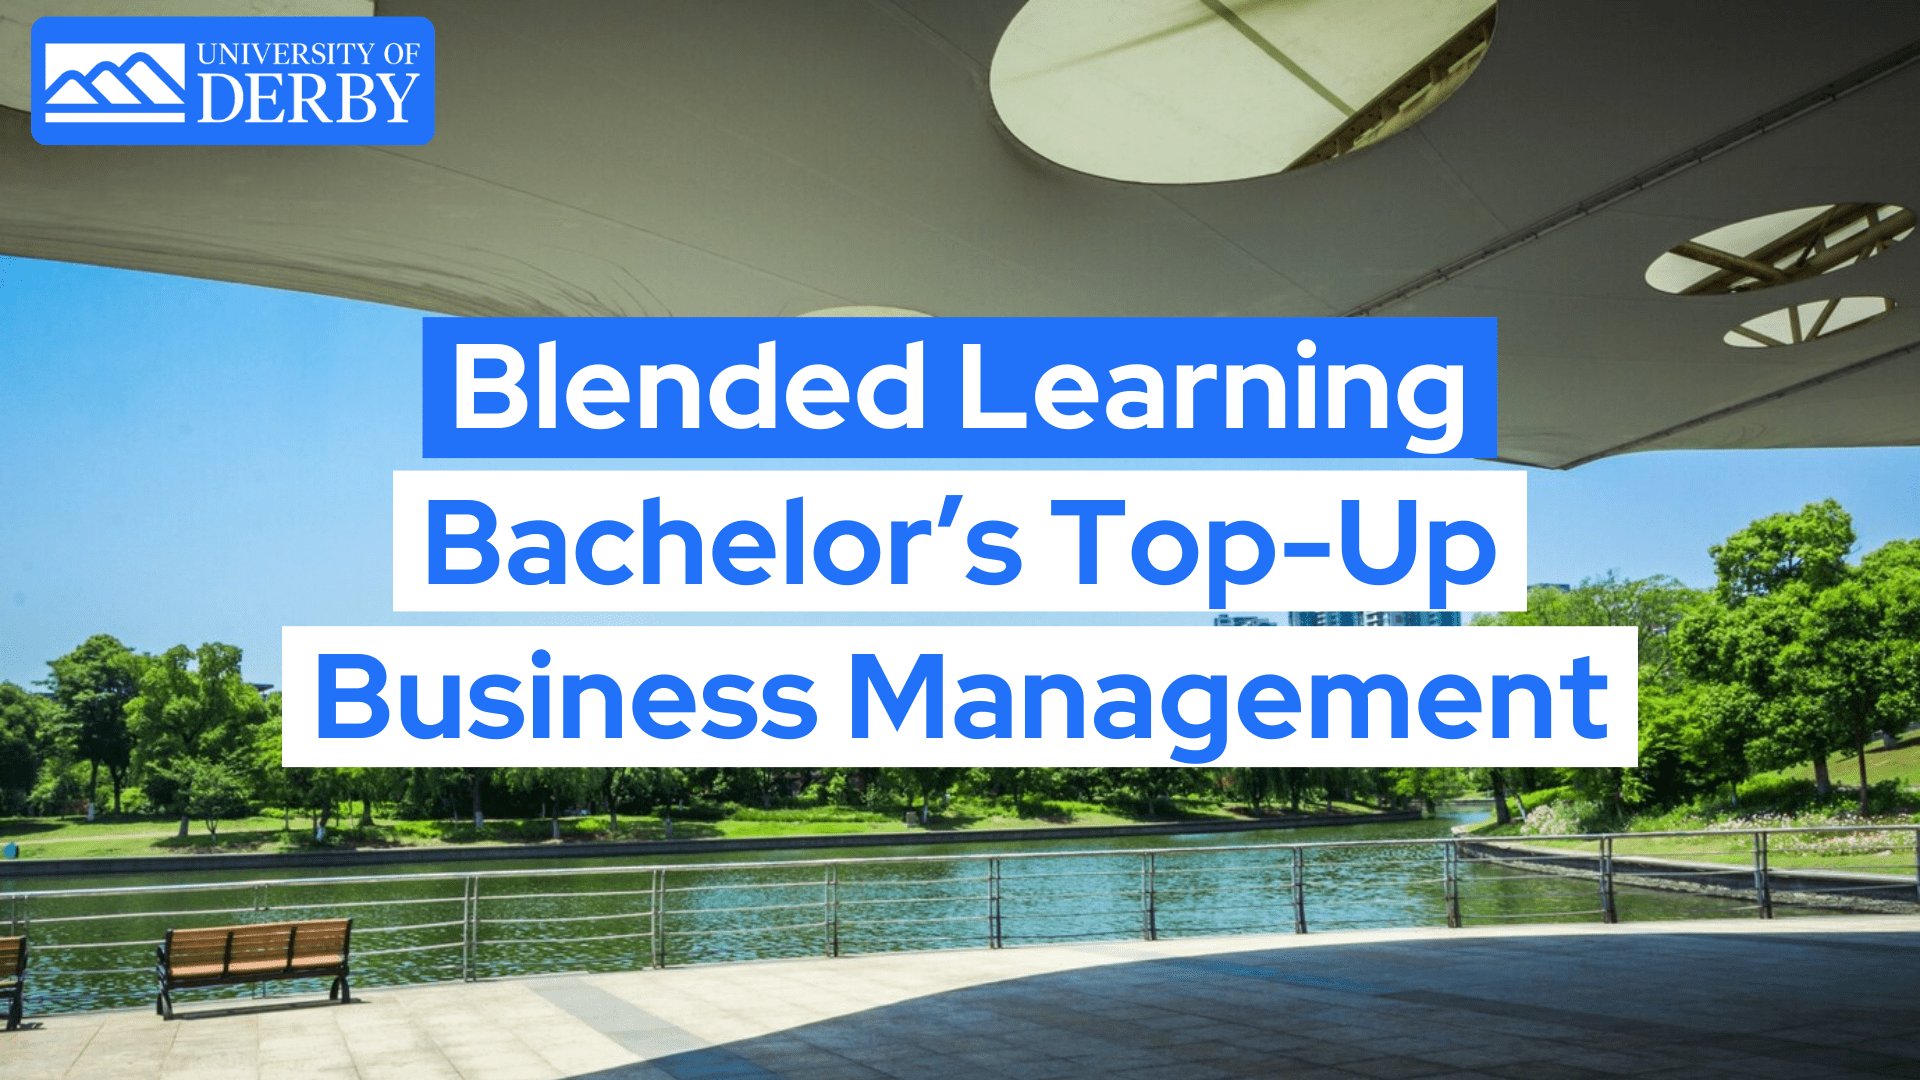 Business degree Malta, Bachelor's top-up in business management